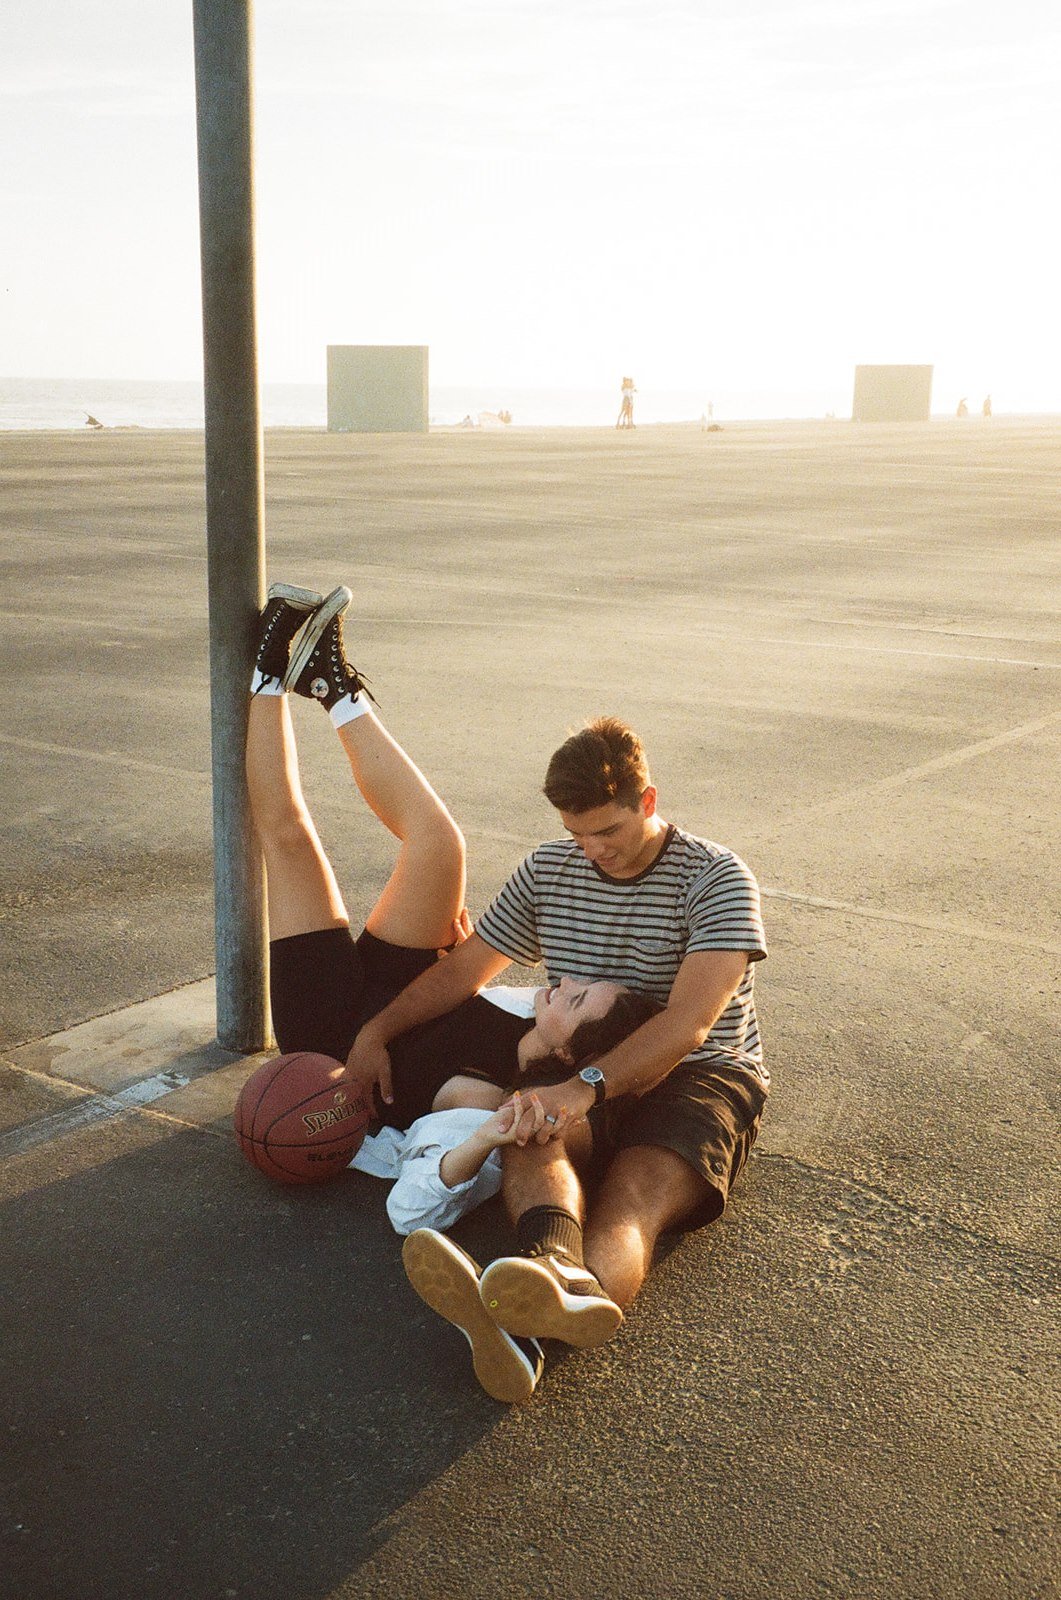 Newport Beach engagement photo session with couple at a basketball court on film